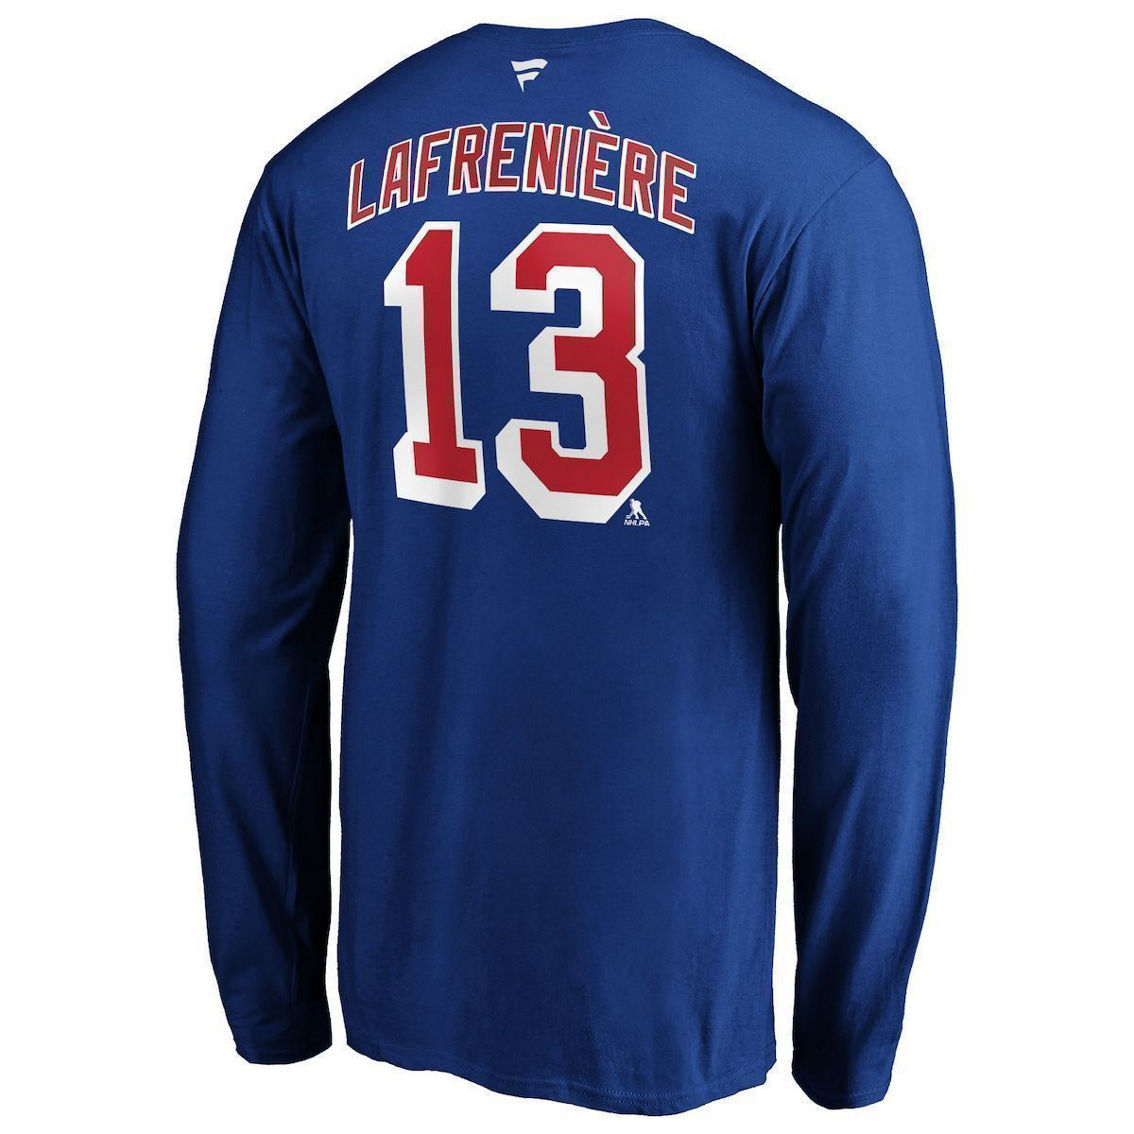 Fanatics Branded Men's Alexis Lafrenière Blue New York Rangers Authentic Stack Name & Number Long Sleeve T-Shirt - Image 4 of 4